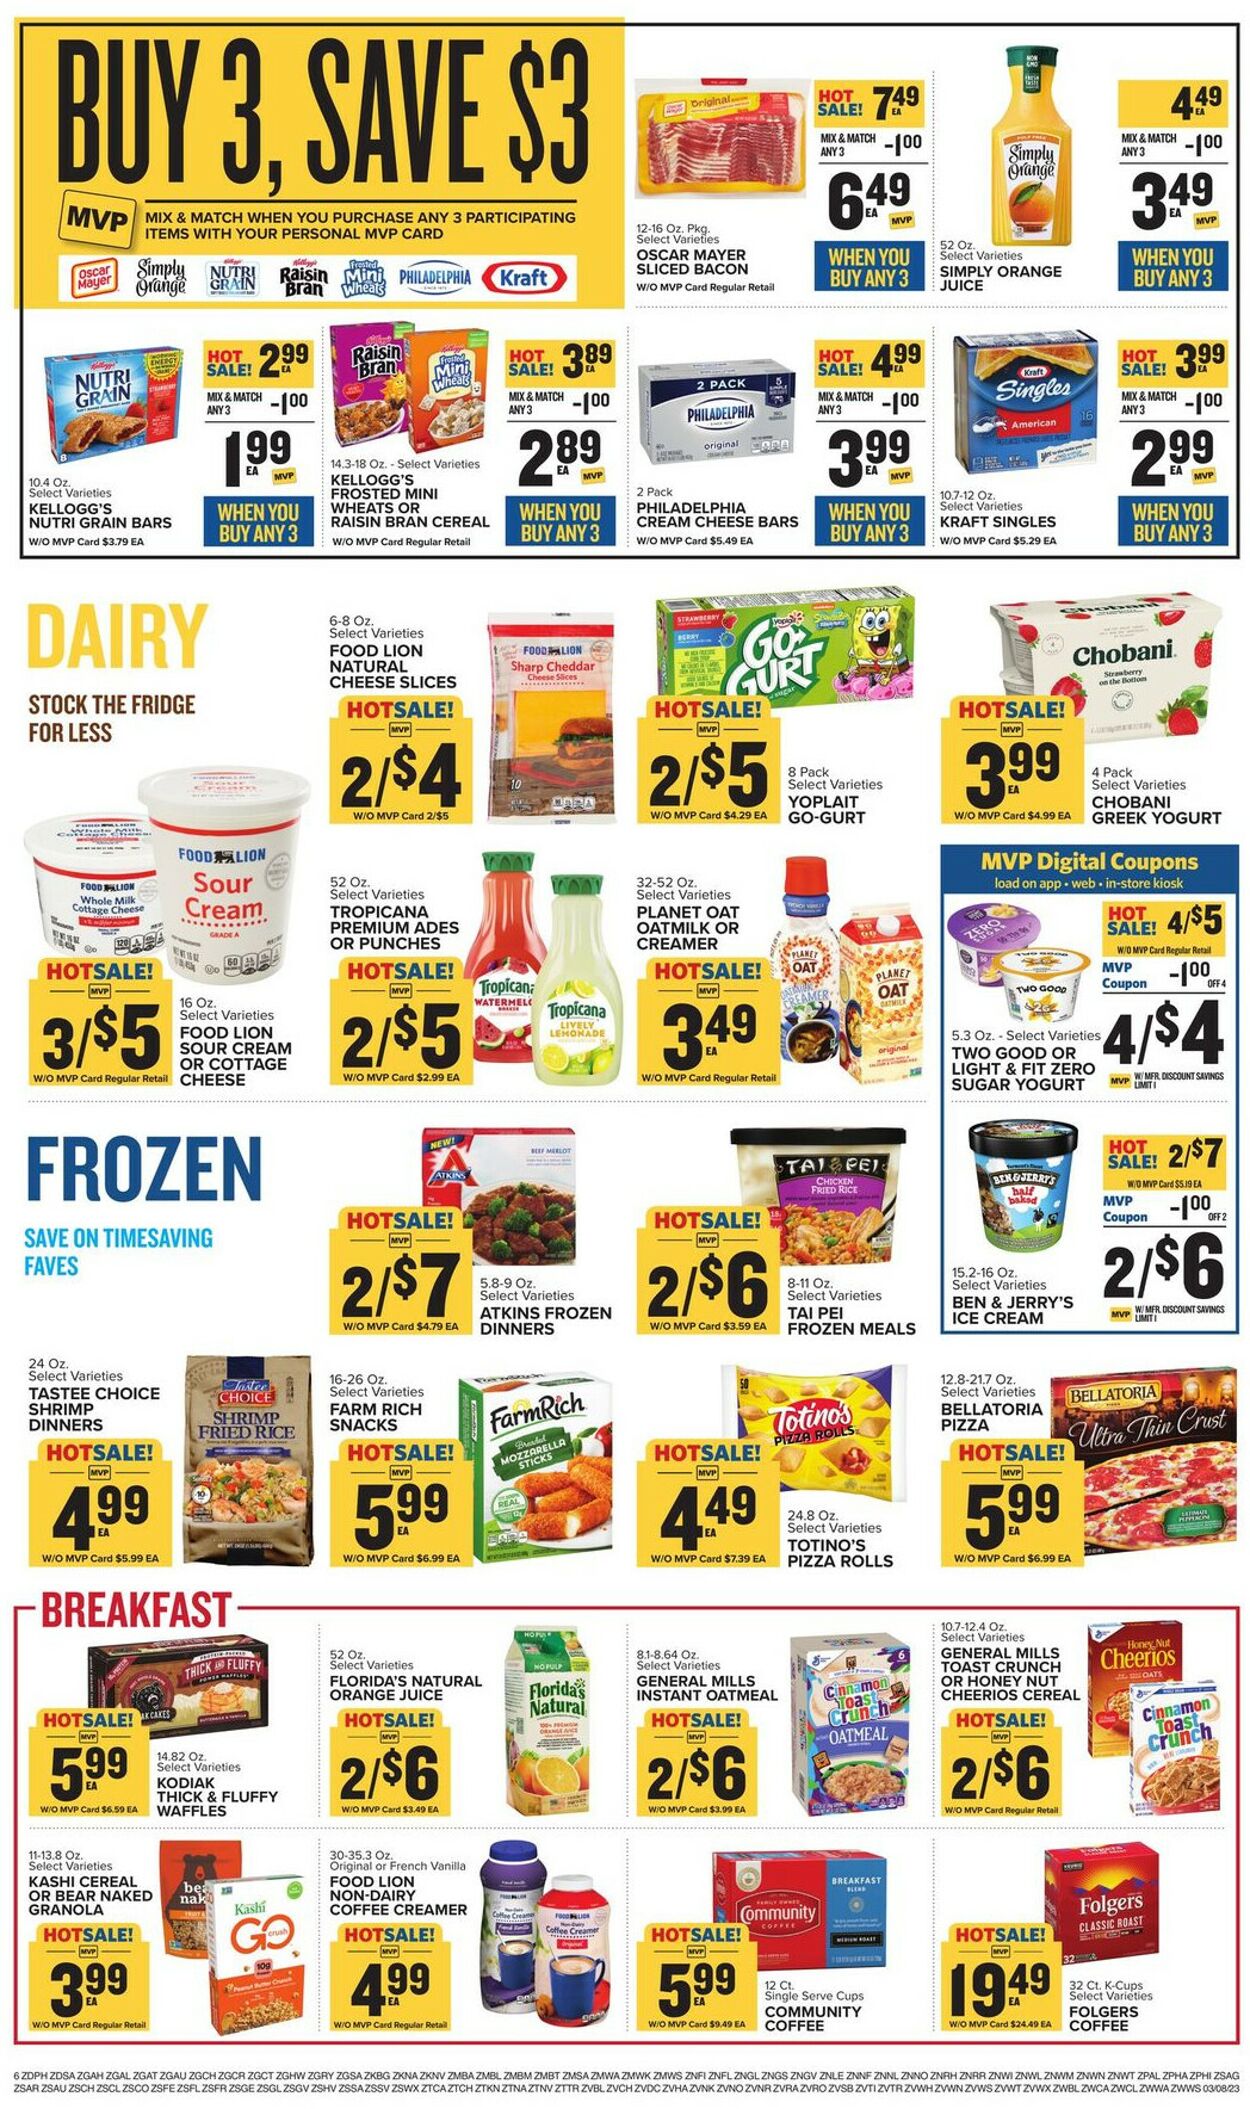 Catalogue Food Lion from 03/08/2023